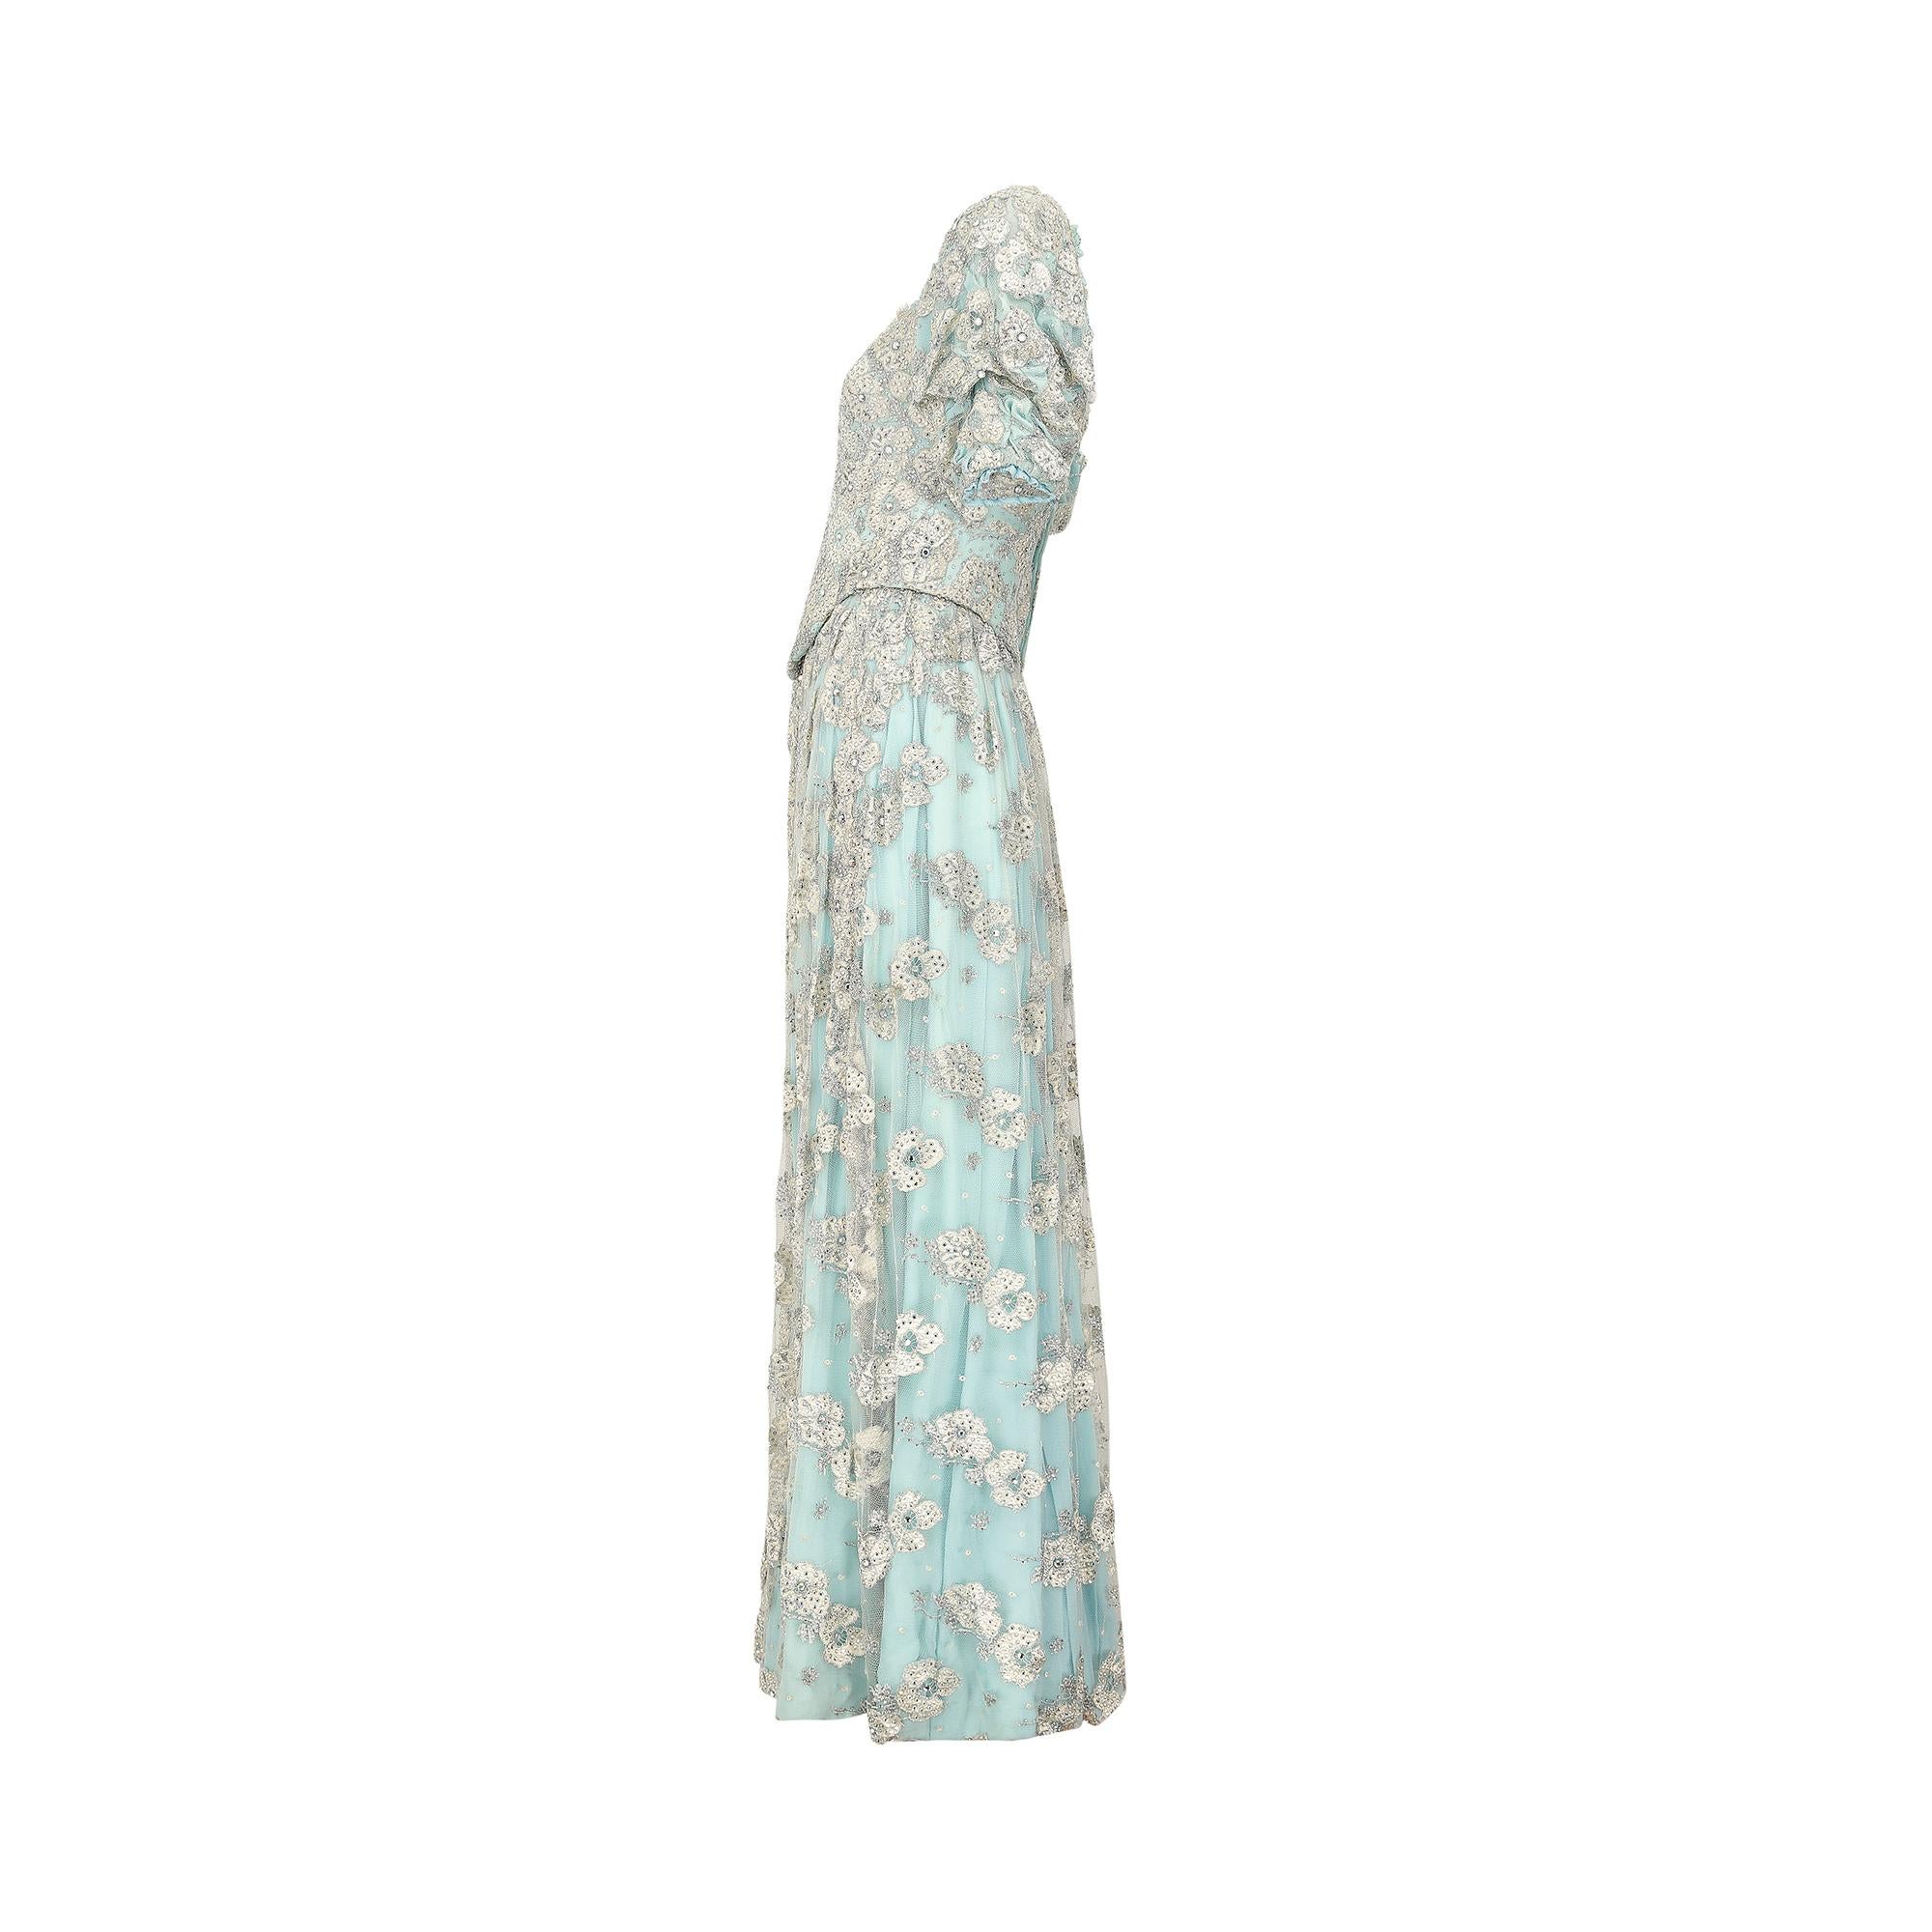 Gray 1990s Bespoke Embellished Lace and Crystal Turquoise Dress For Sale